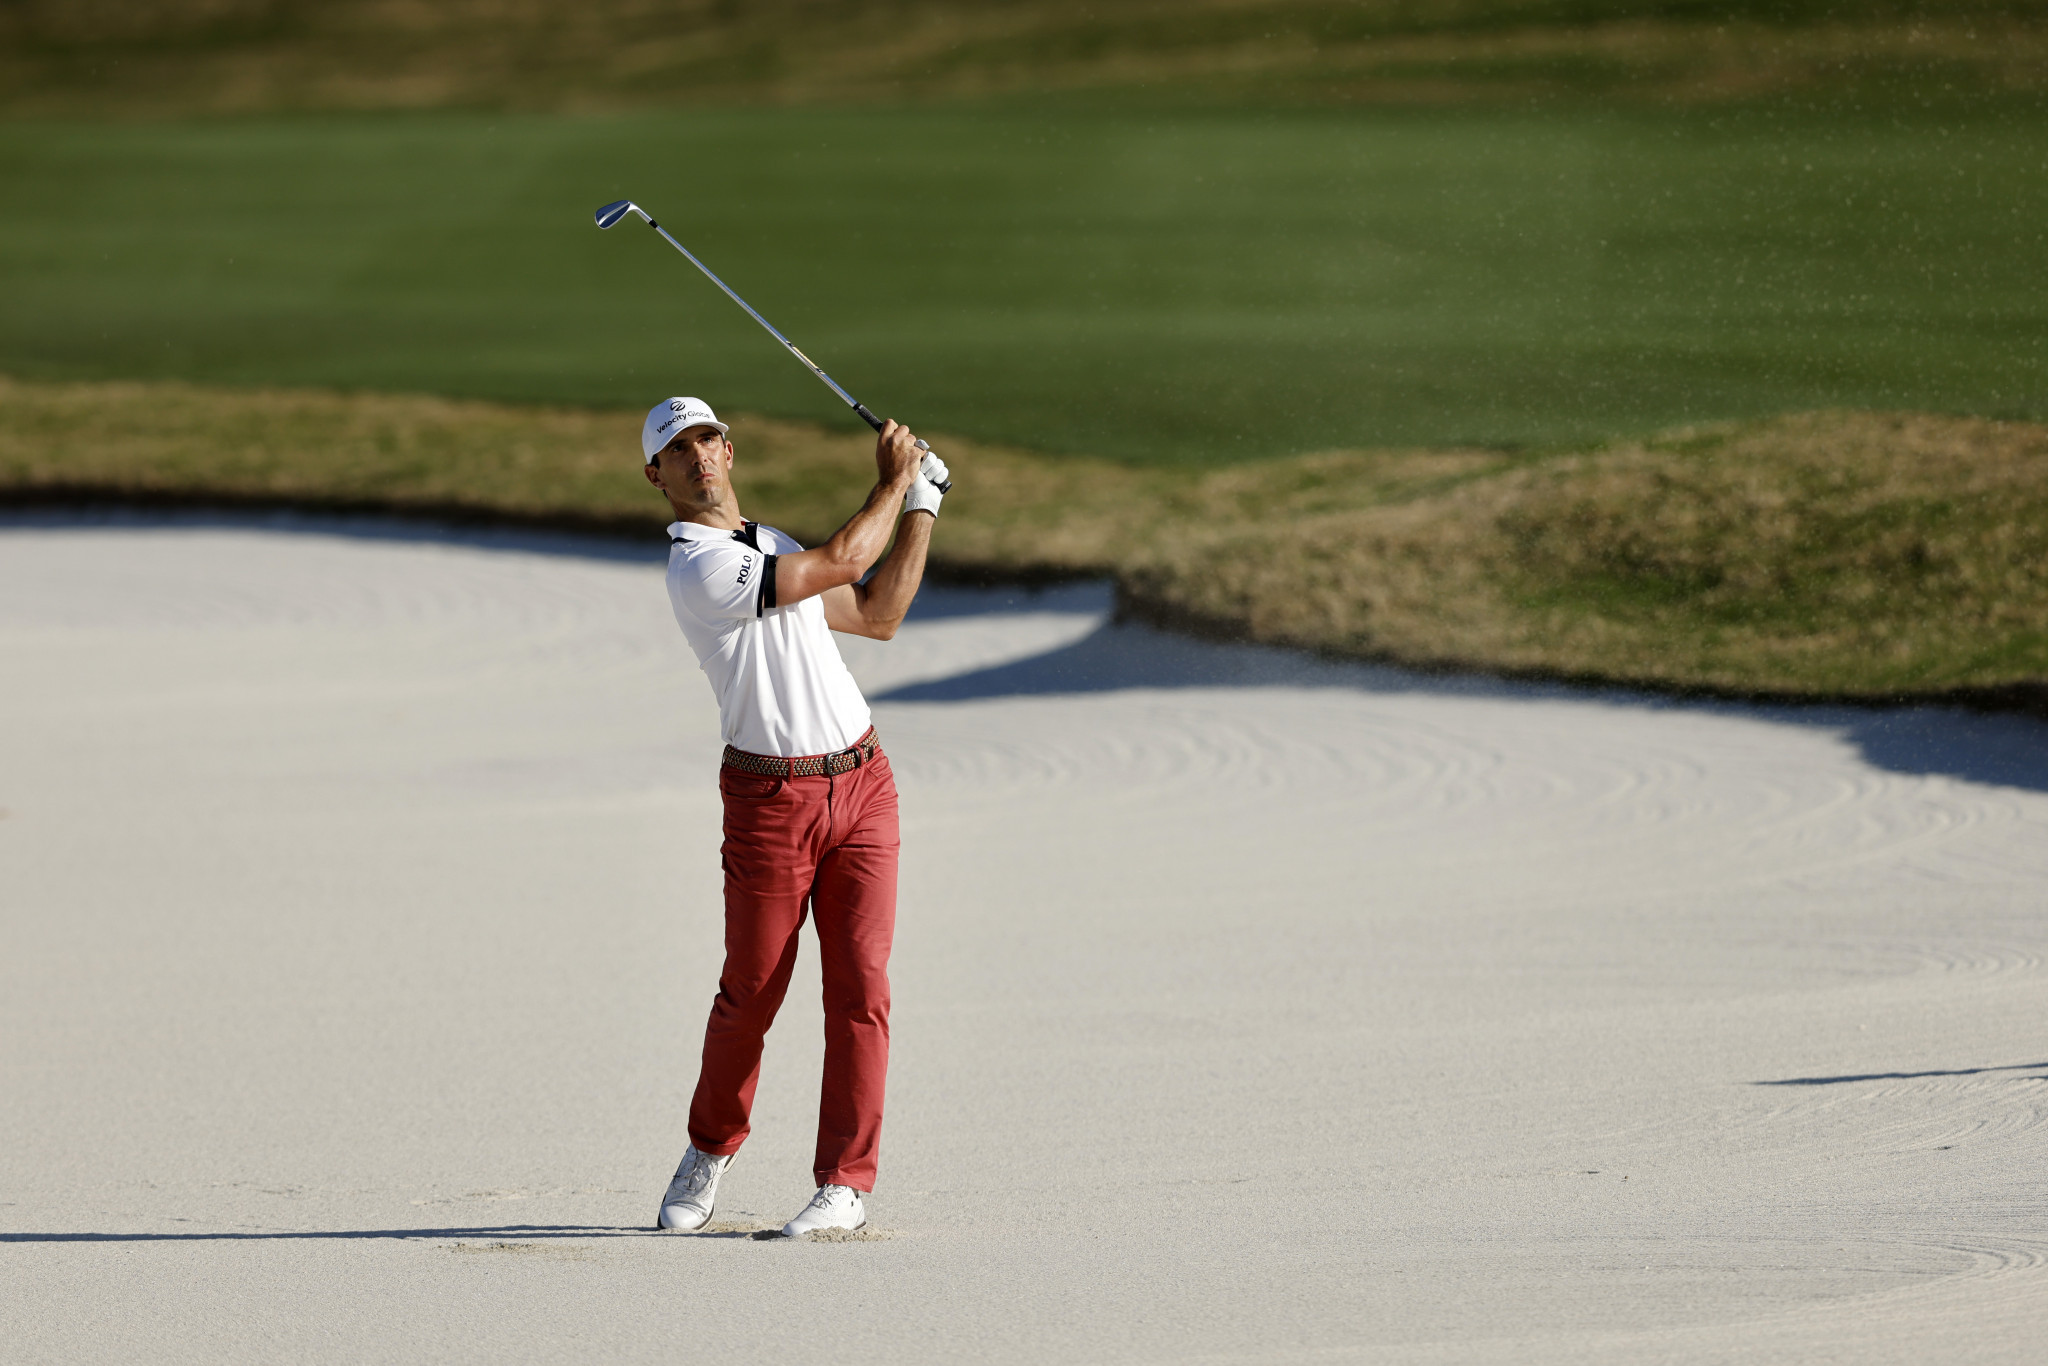 Billy Horschel won the WGC-Match Play in Texas, a mon after finishing second at the WGC-Championship ©Getty Images